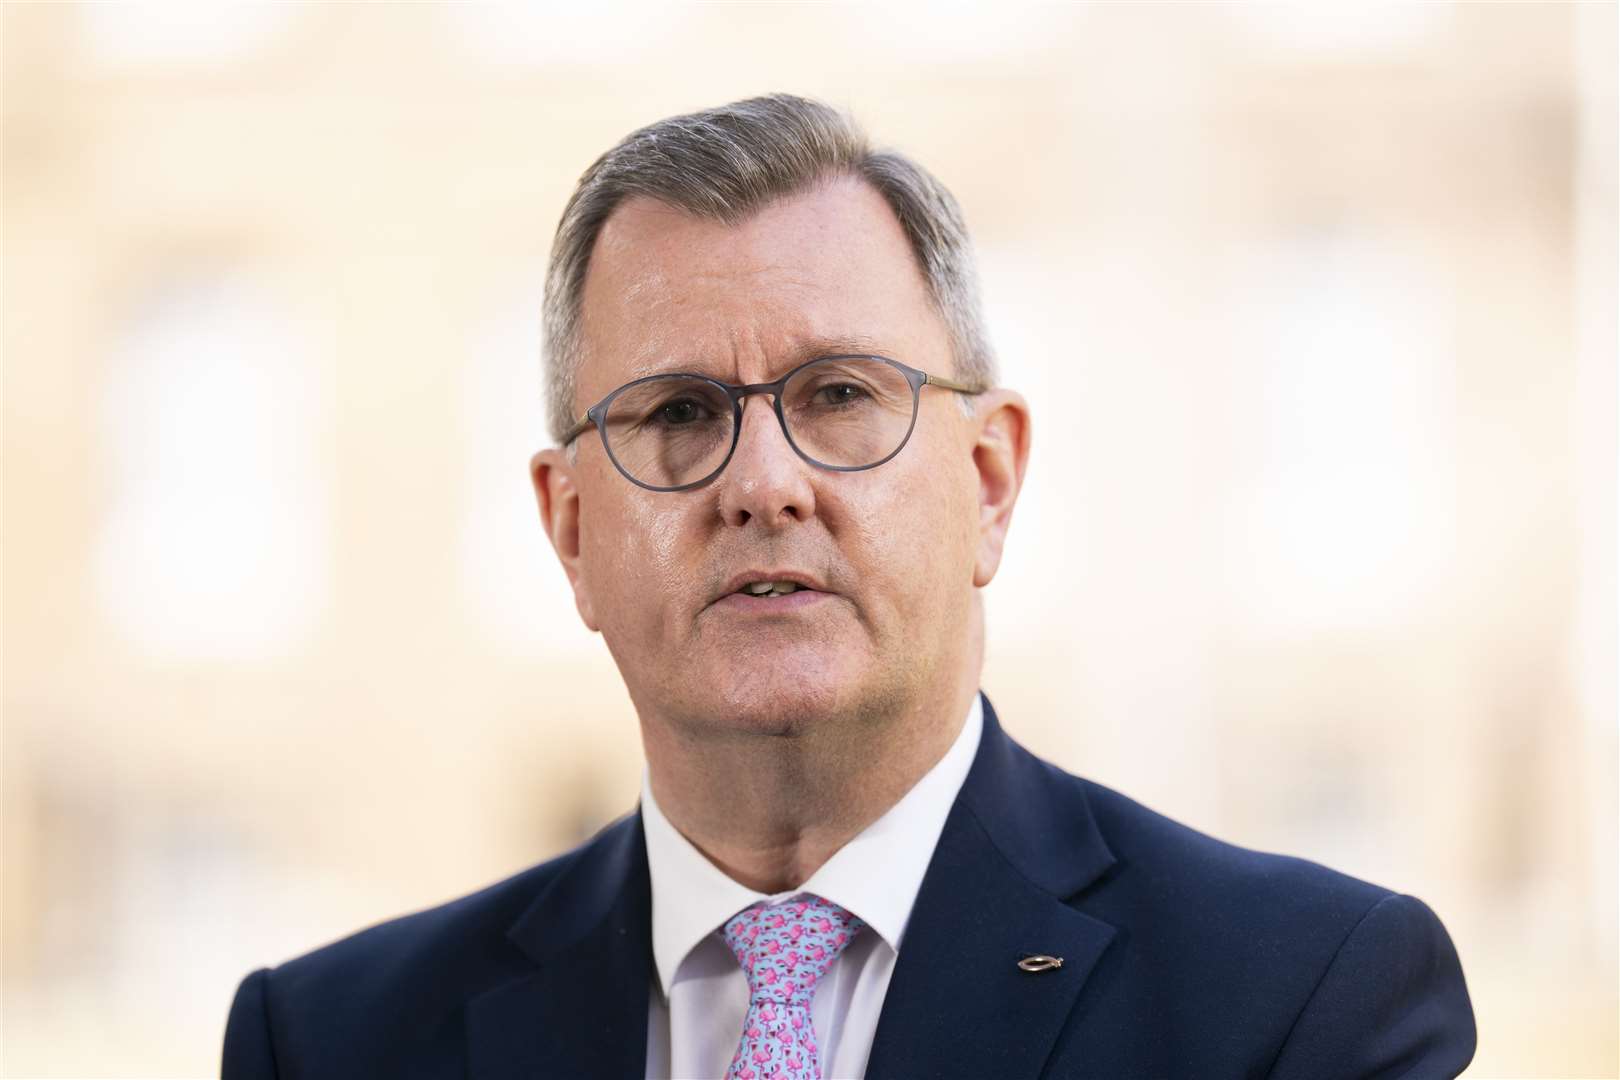 DUP leader Sir Jeffrey Donaldson has said his party will decide its next step only once the new prime minister is in office (Kirsty O’Connor/PA)